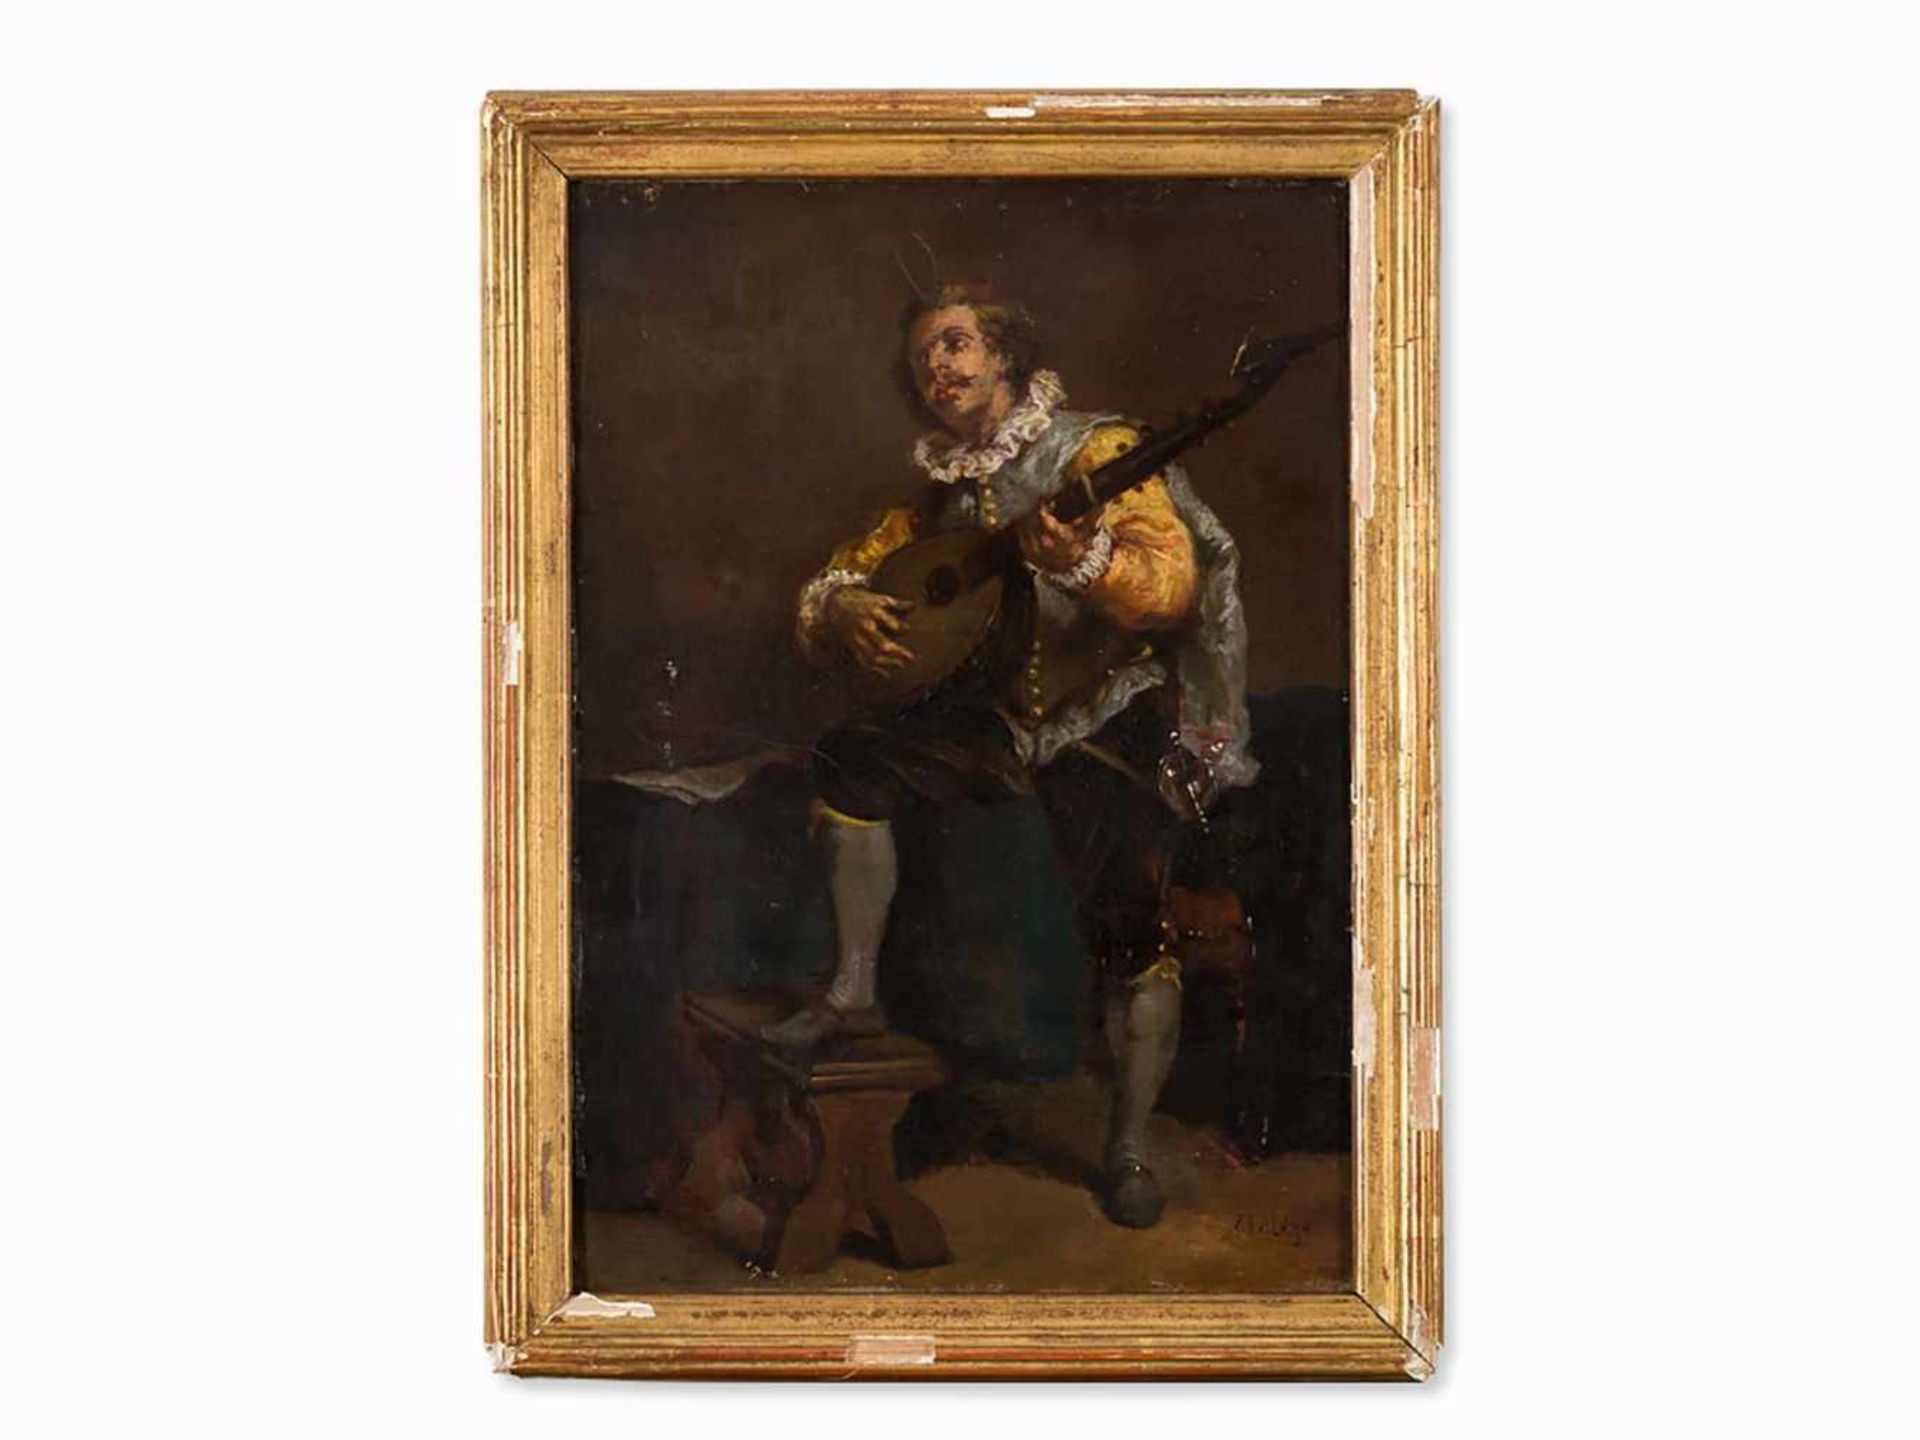 Enrique Atalaya (1851-1914), Man Playing The Lute, Oil, c. 1880